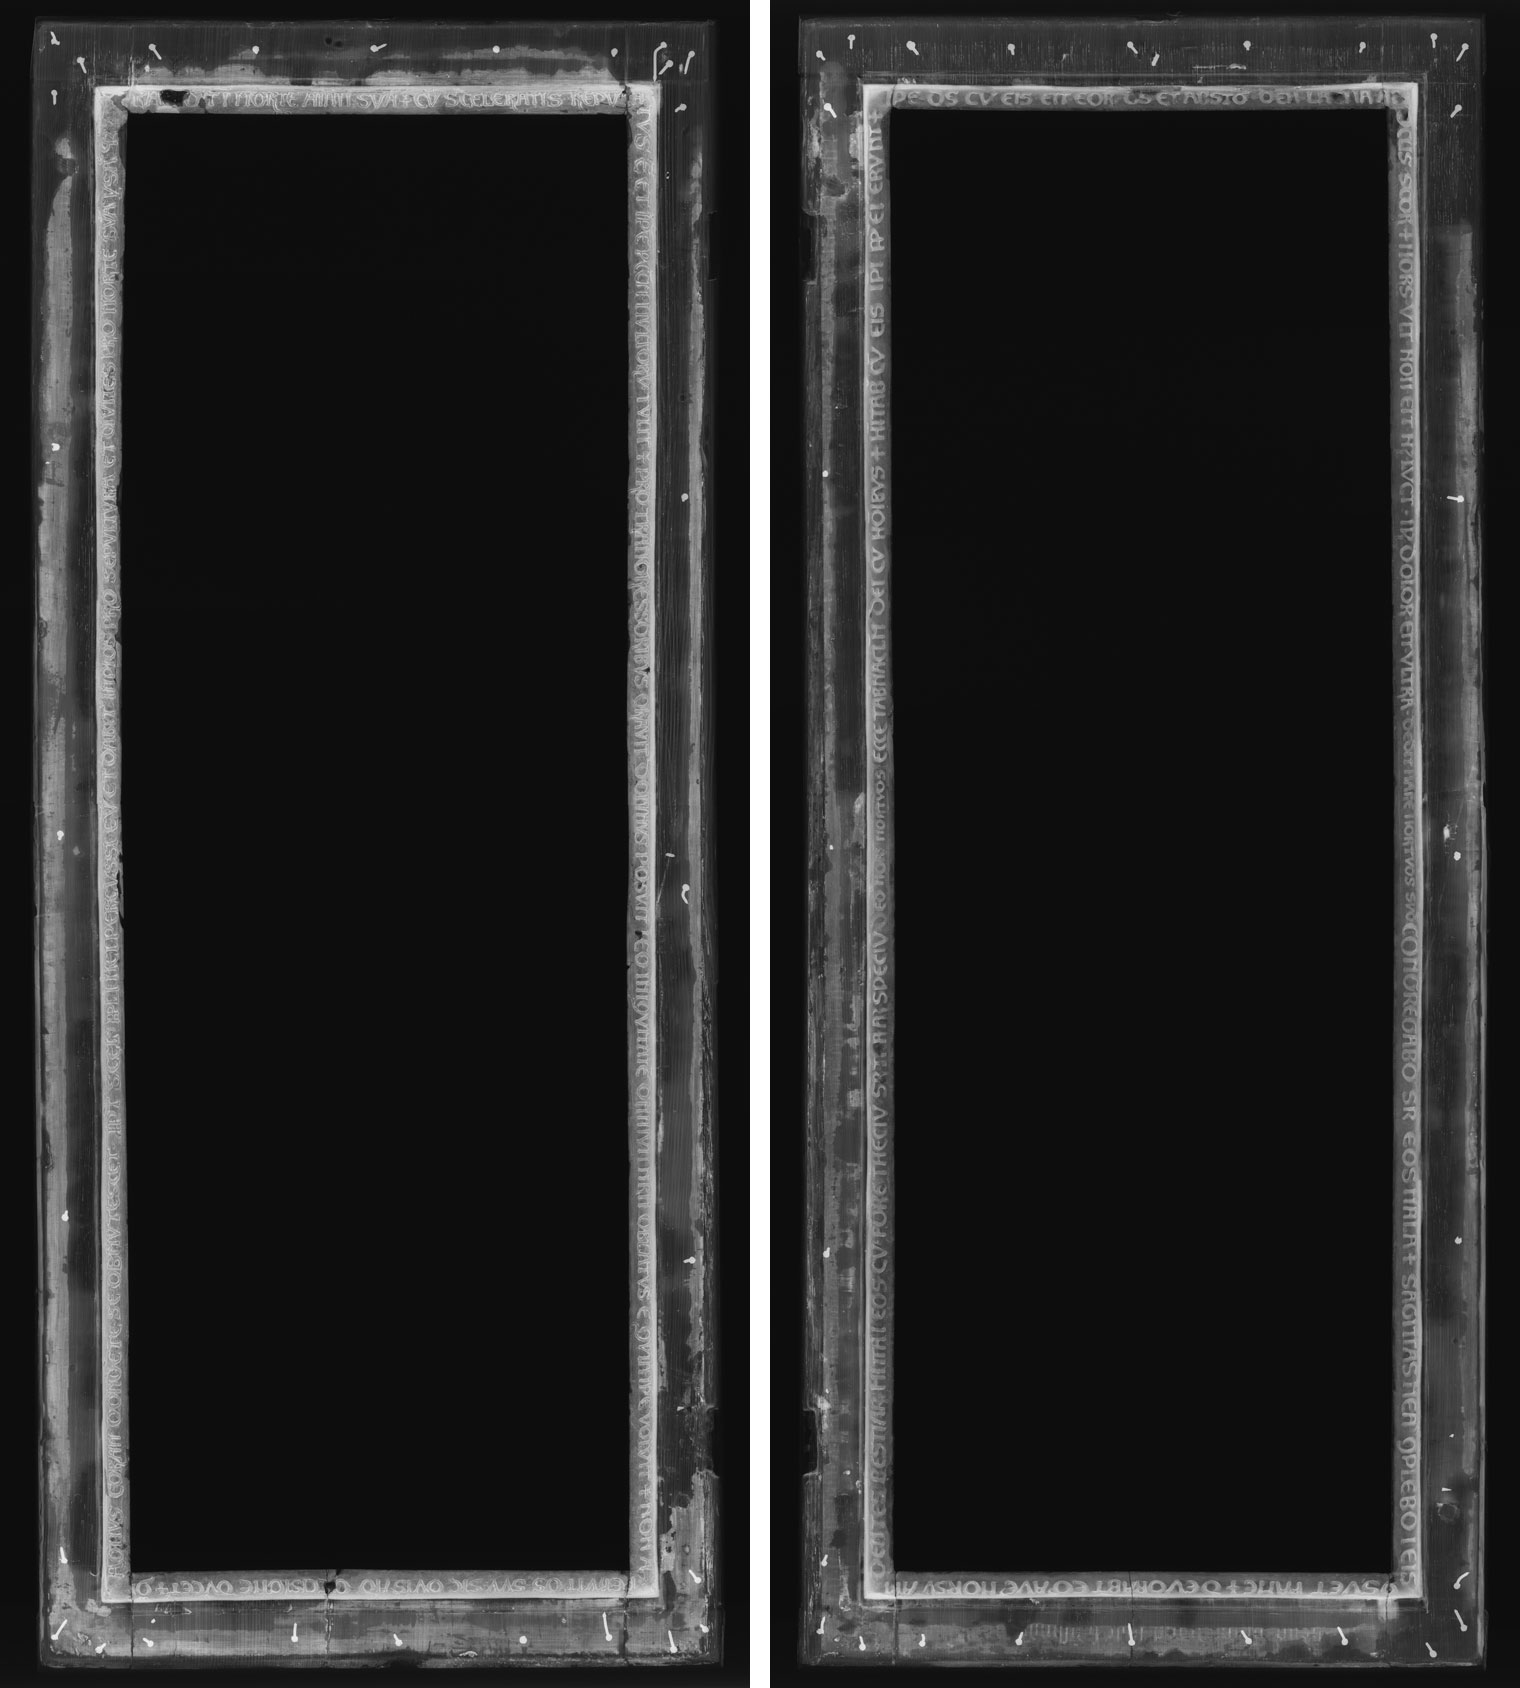 X-radiograph images of two painting frames